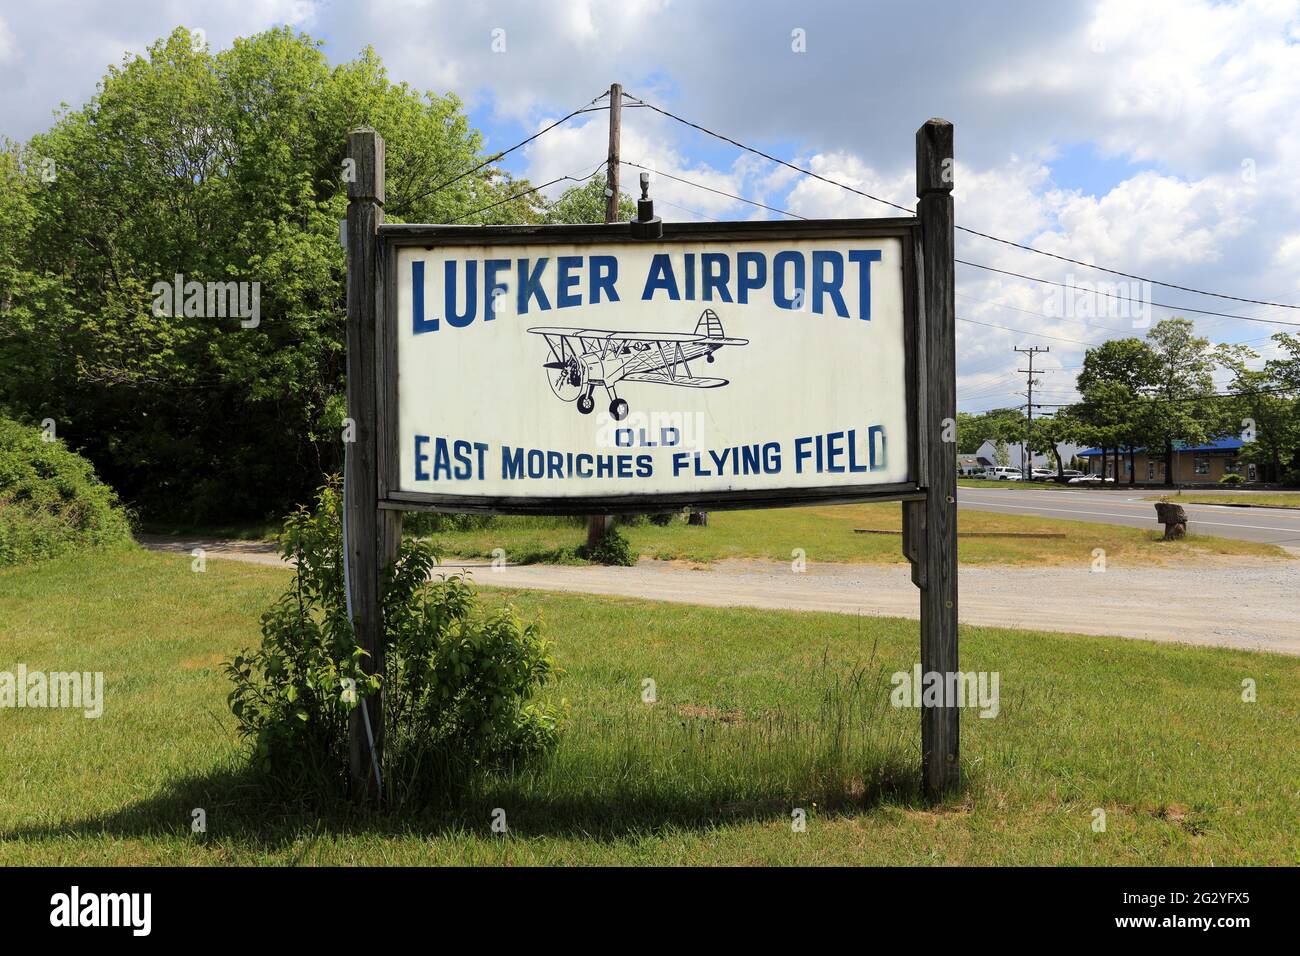 Lufker Airport East Moriches Long Island New York Stock Photo